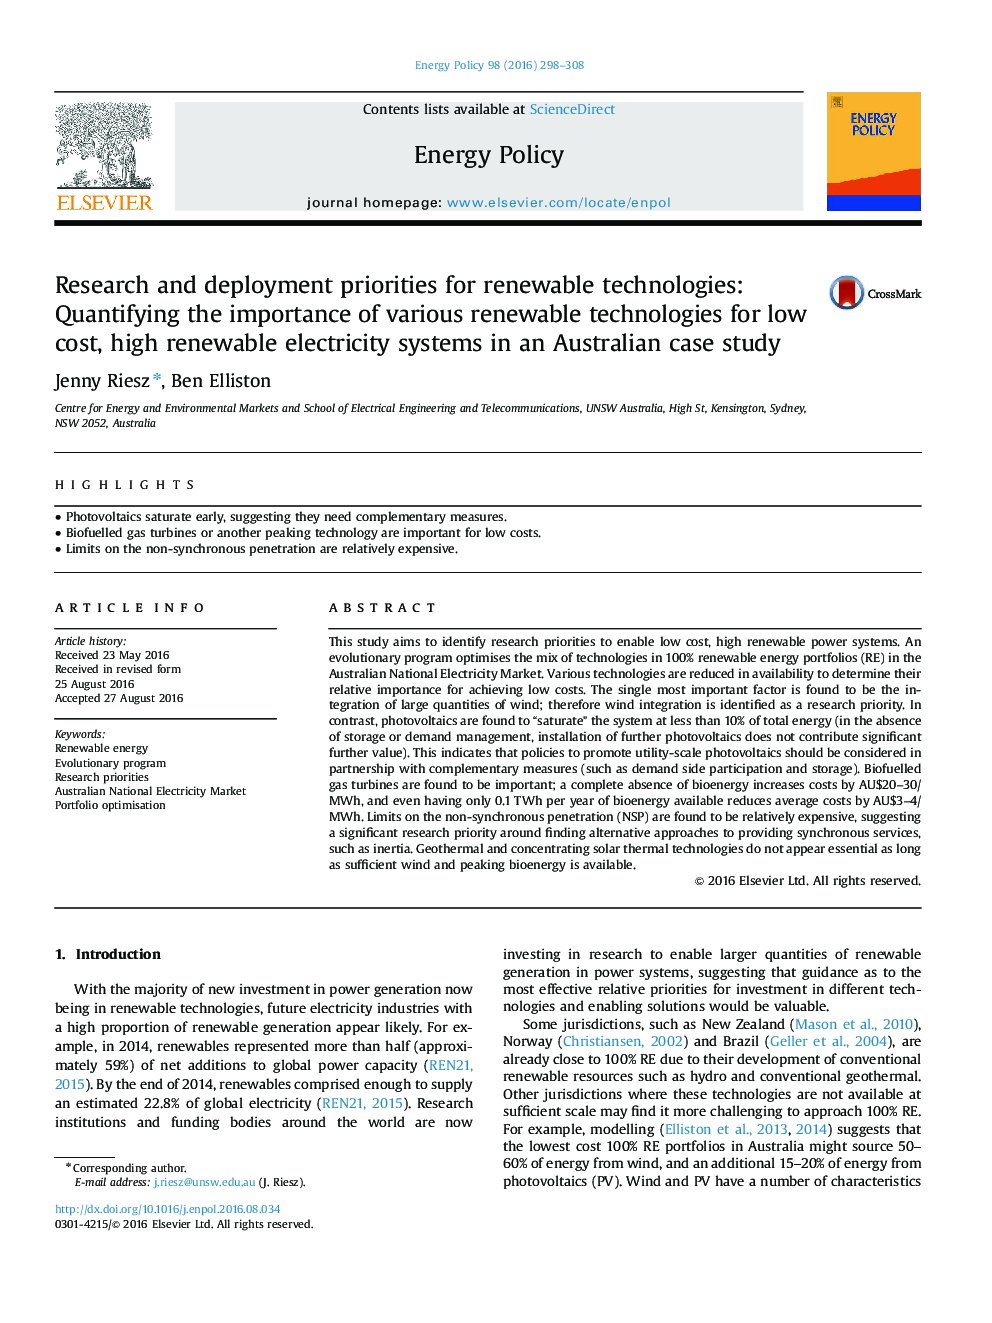 Research and deployment priorities for renewable technologies: Quantifying the importance of various renewable technologies for low cost, high renewable electricity systems in an Australian case study